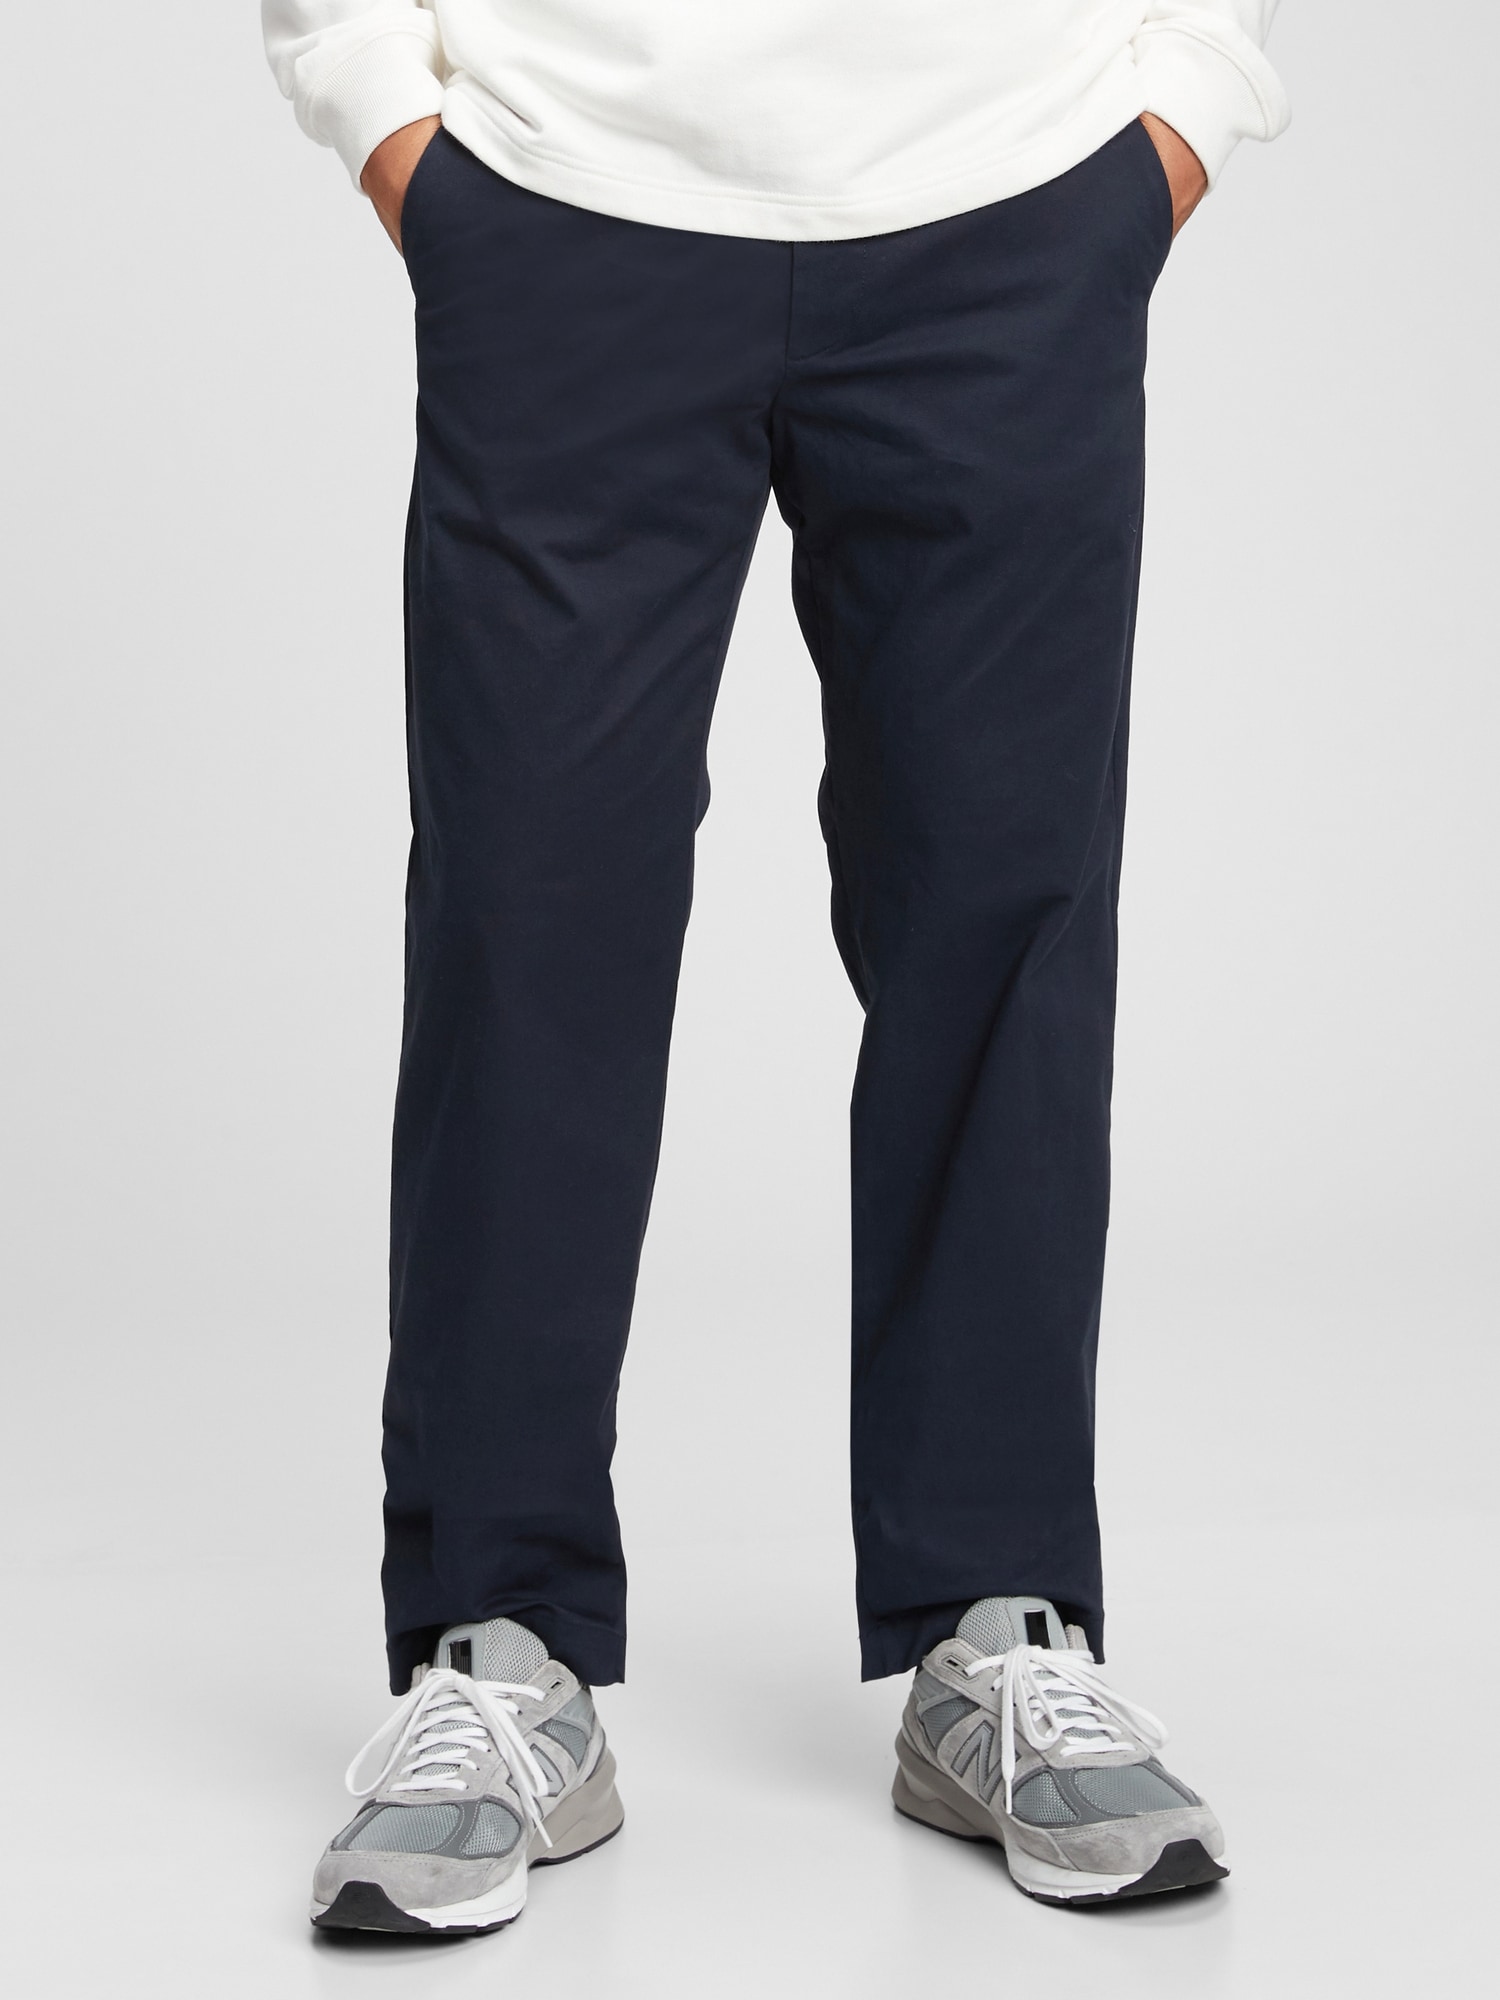 Modern Khakis in Relaxed Fit with GapFlex | Gap